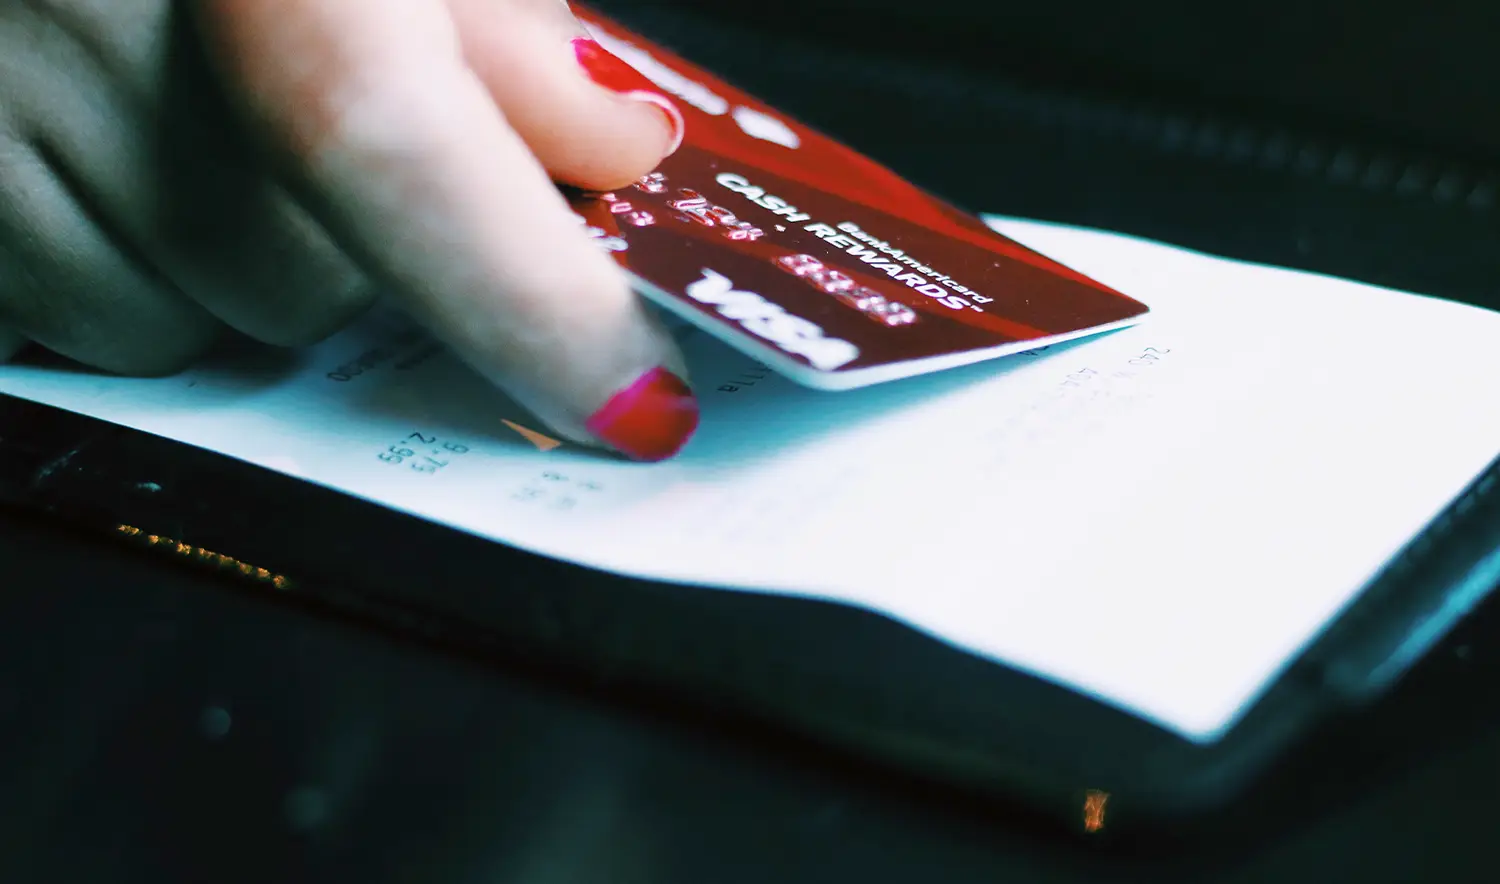 A woman's hand holding a credit card over a credit card receipt